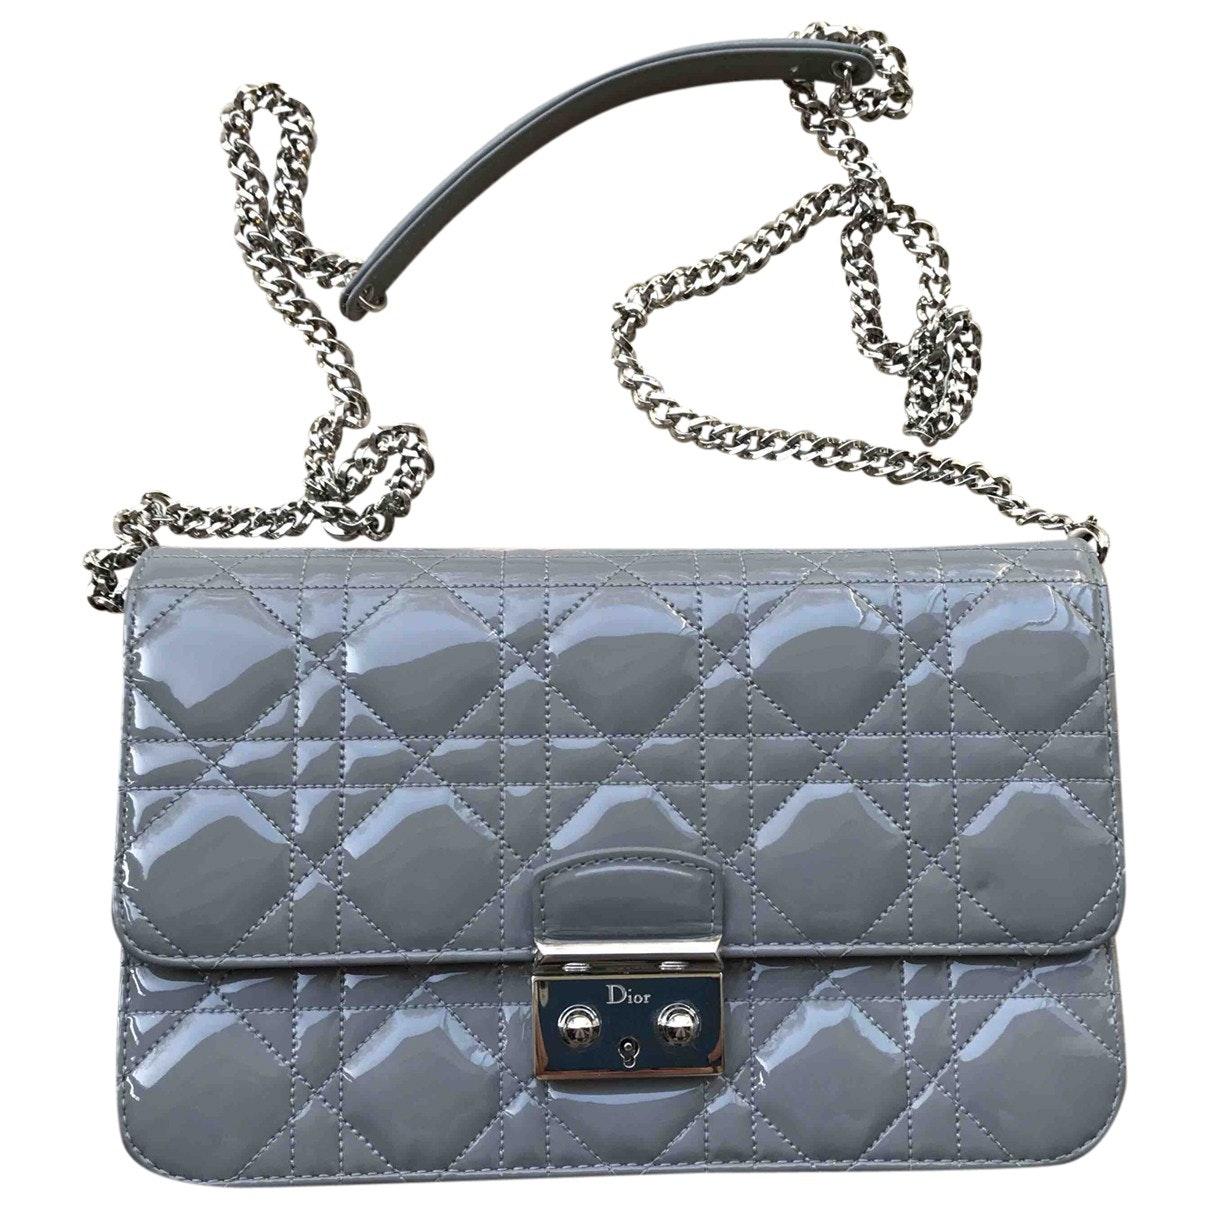 Dior Miss Grey Patent Leather Handbag in Gray - Lyst